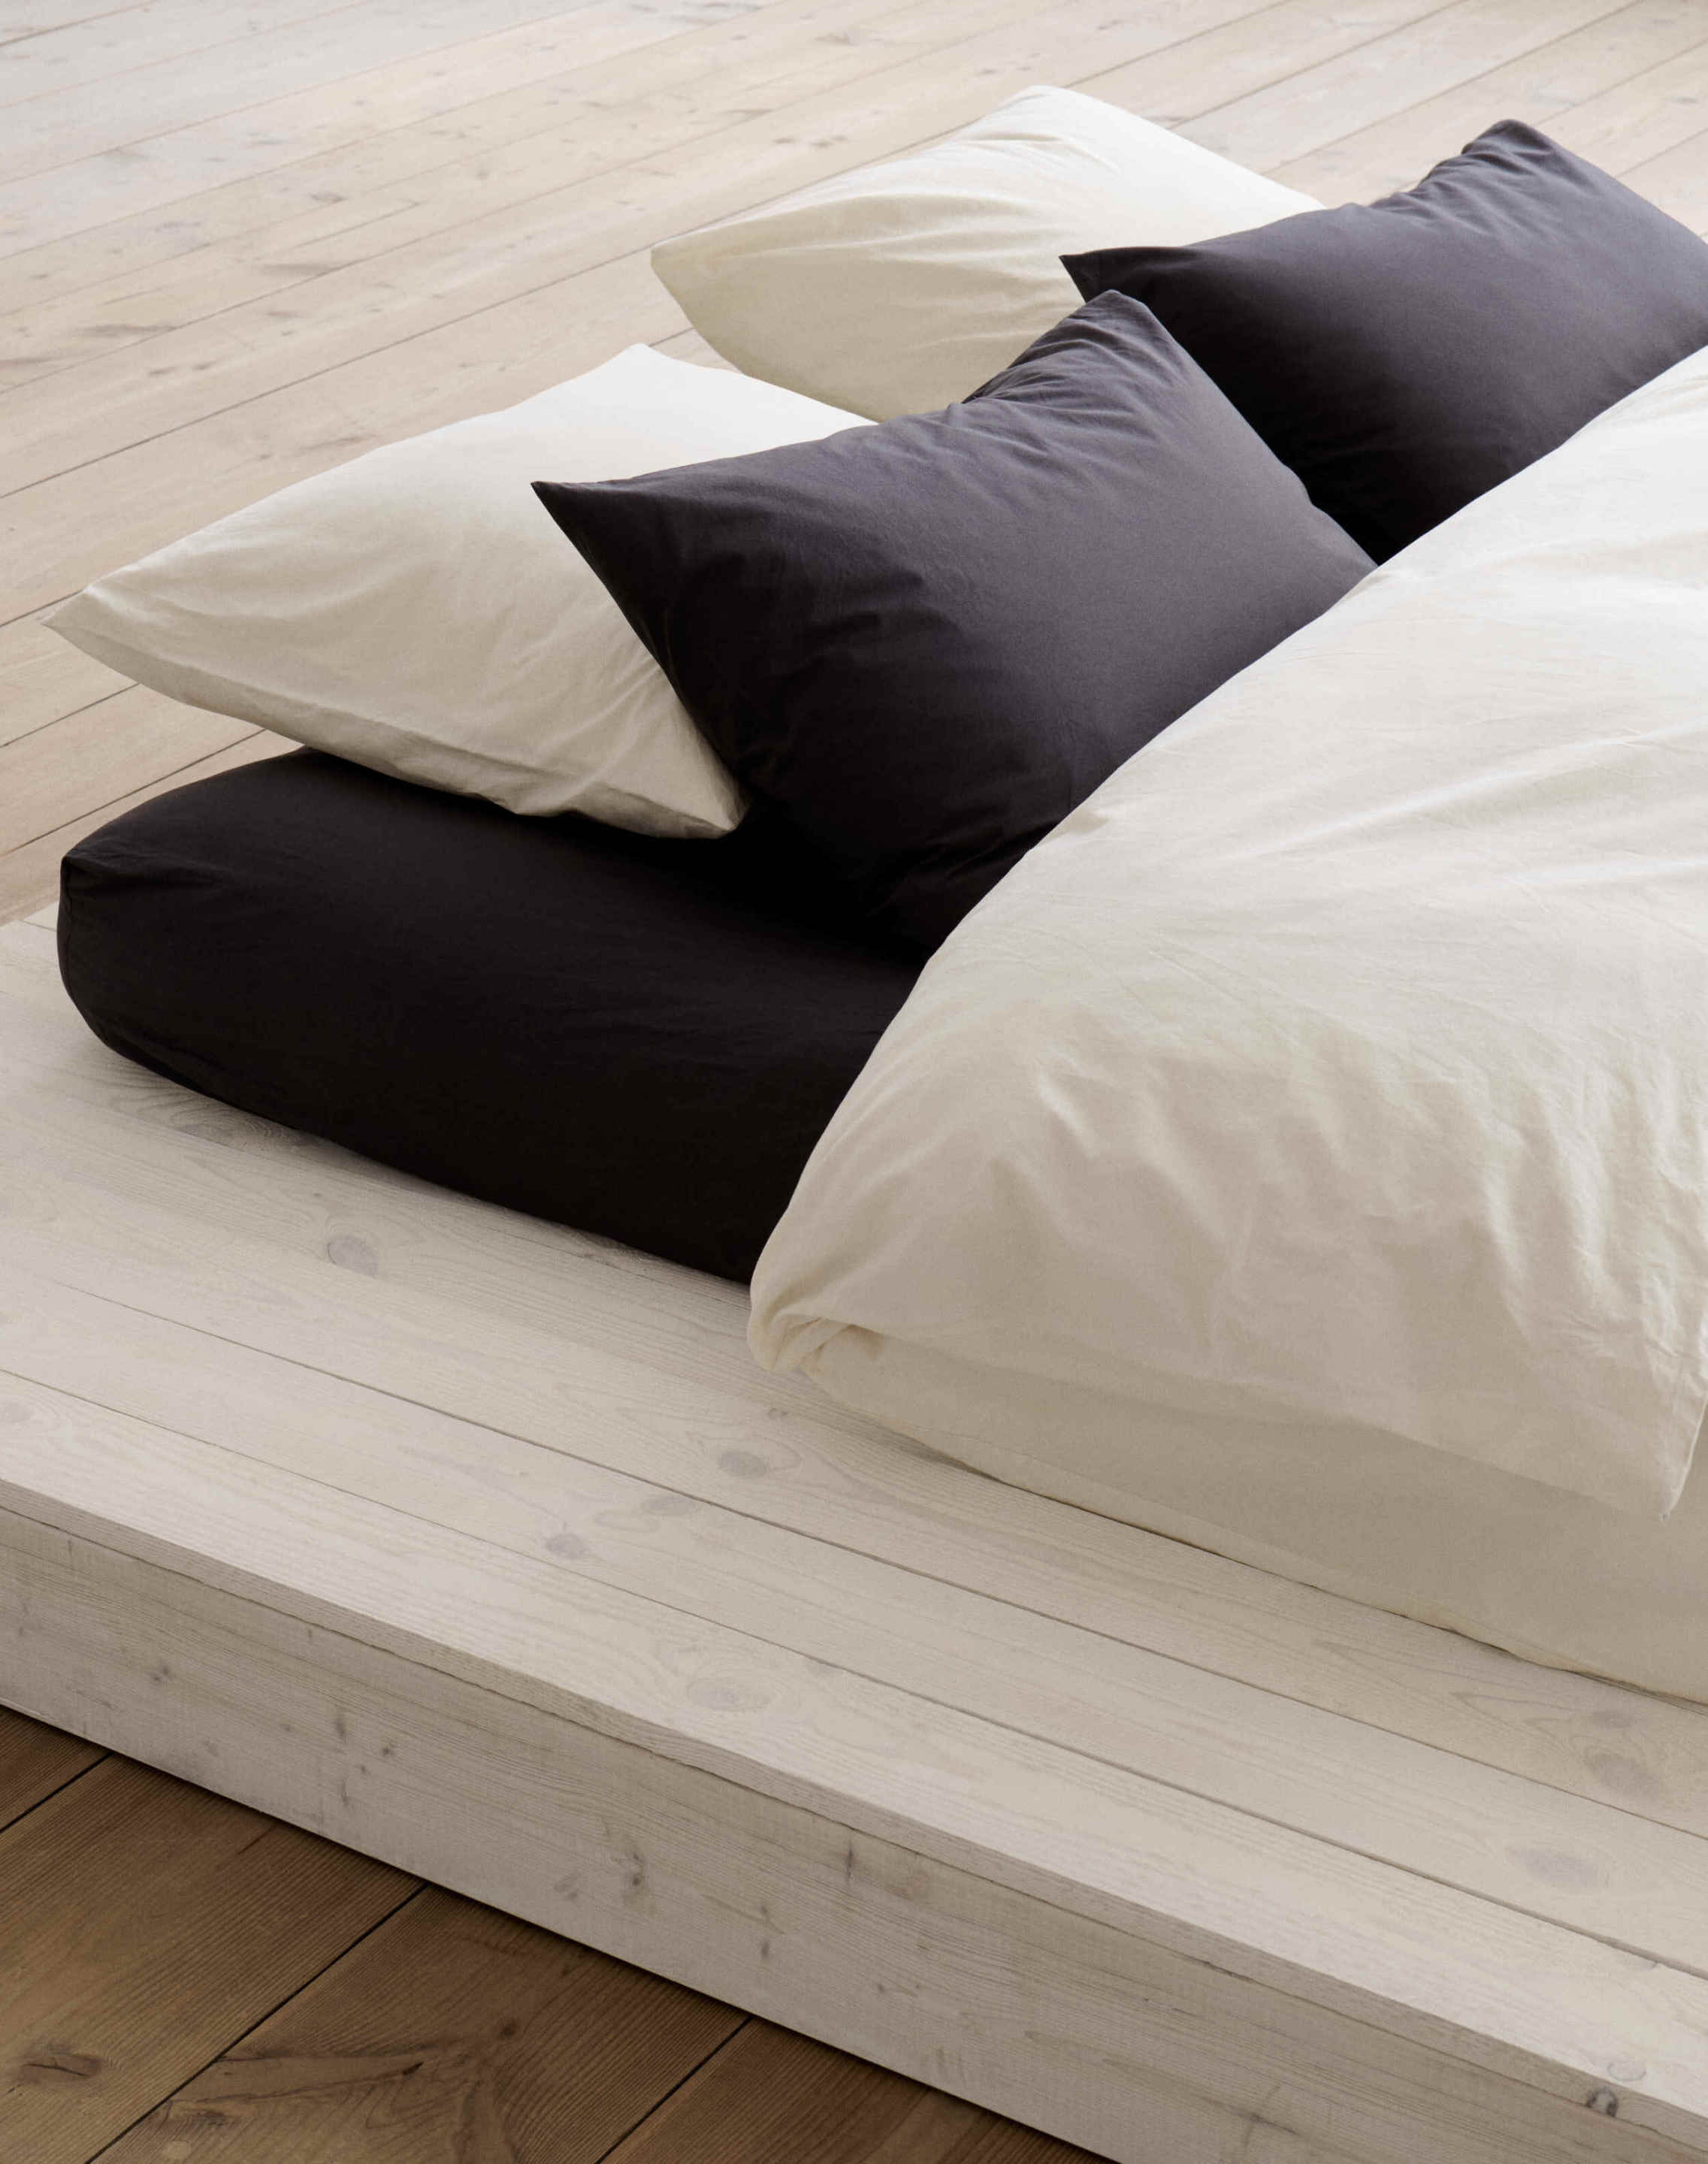 Ash Black paired with Winter White bedding